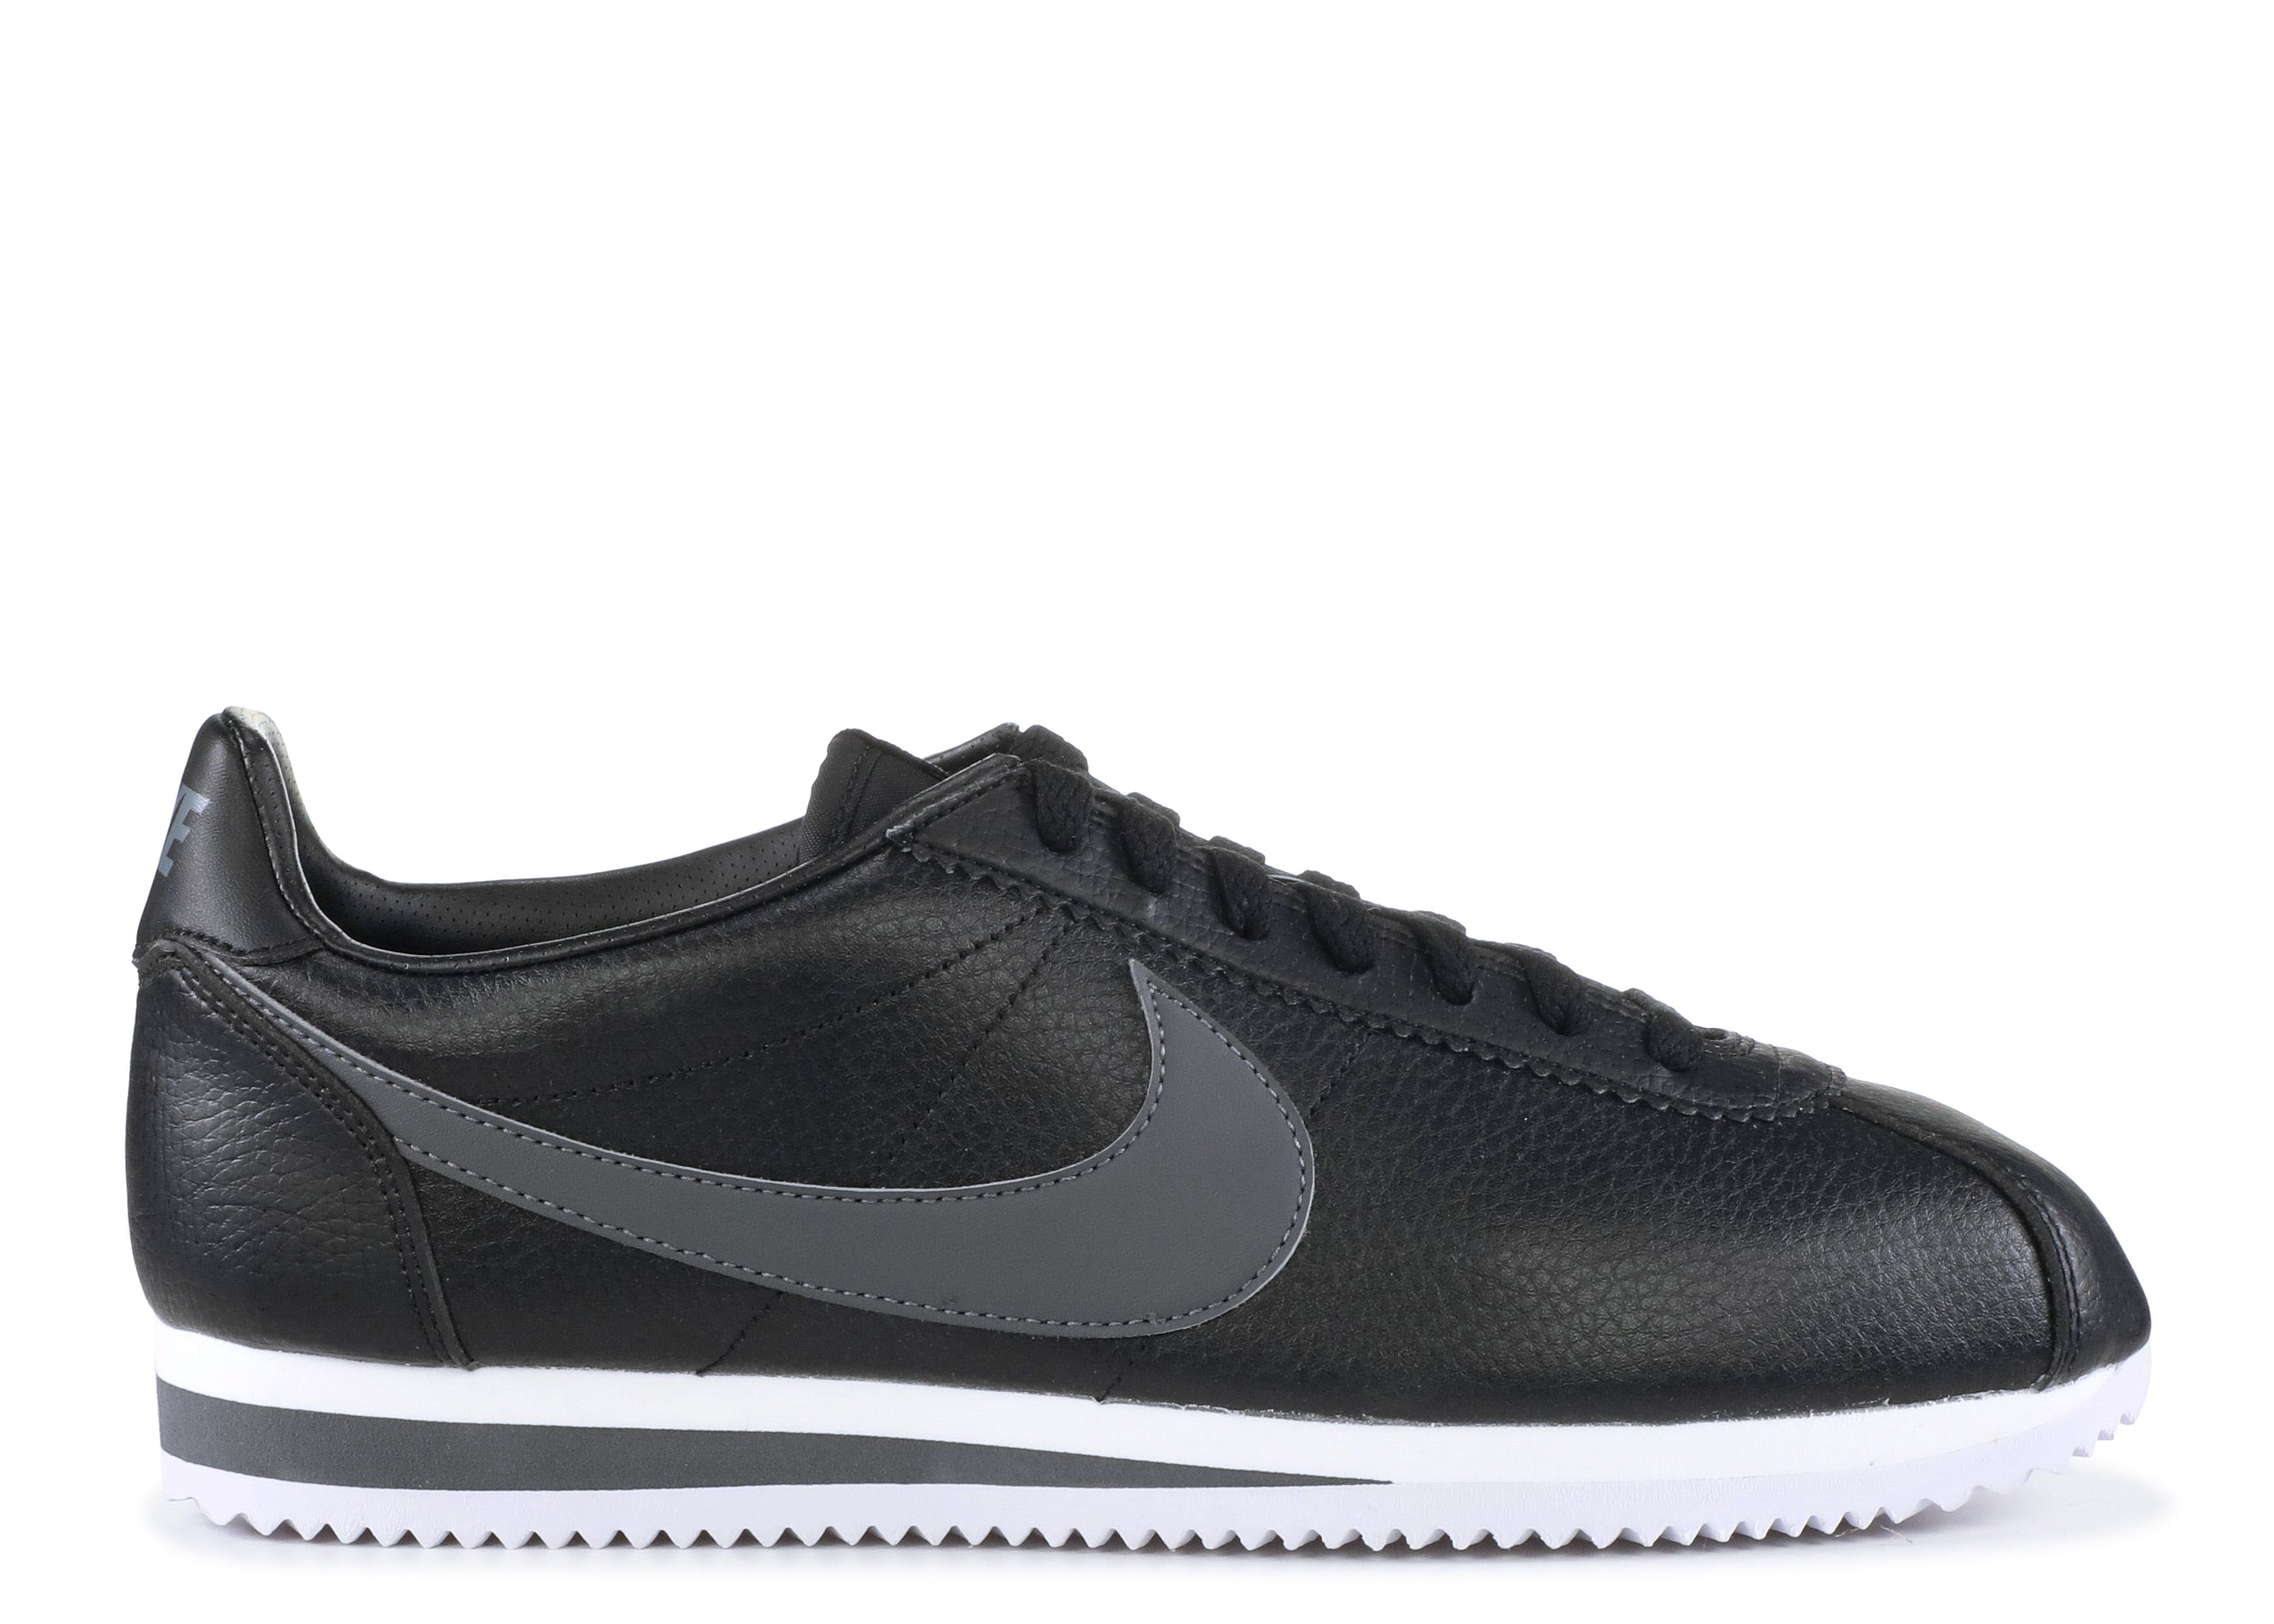 nike cortez black and white leather